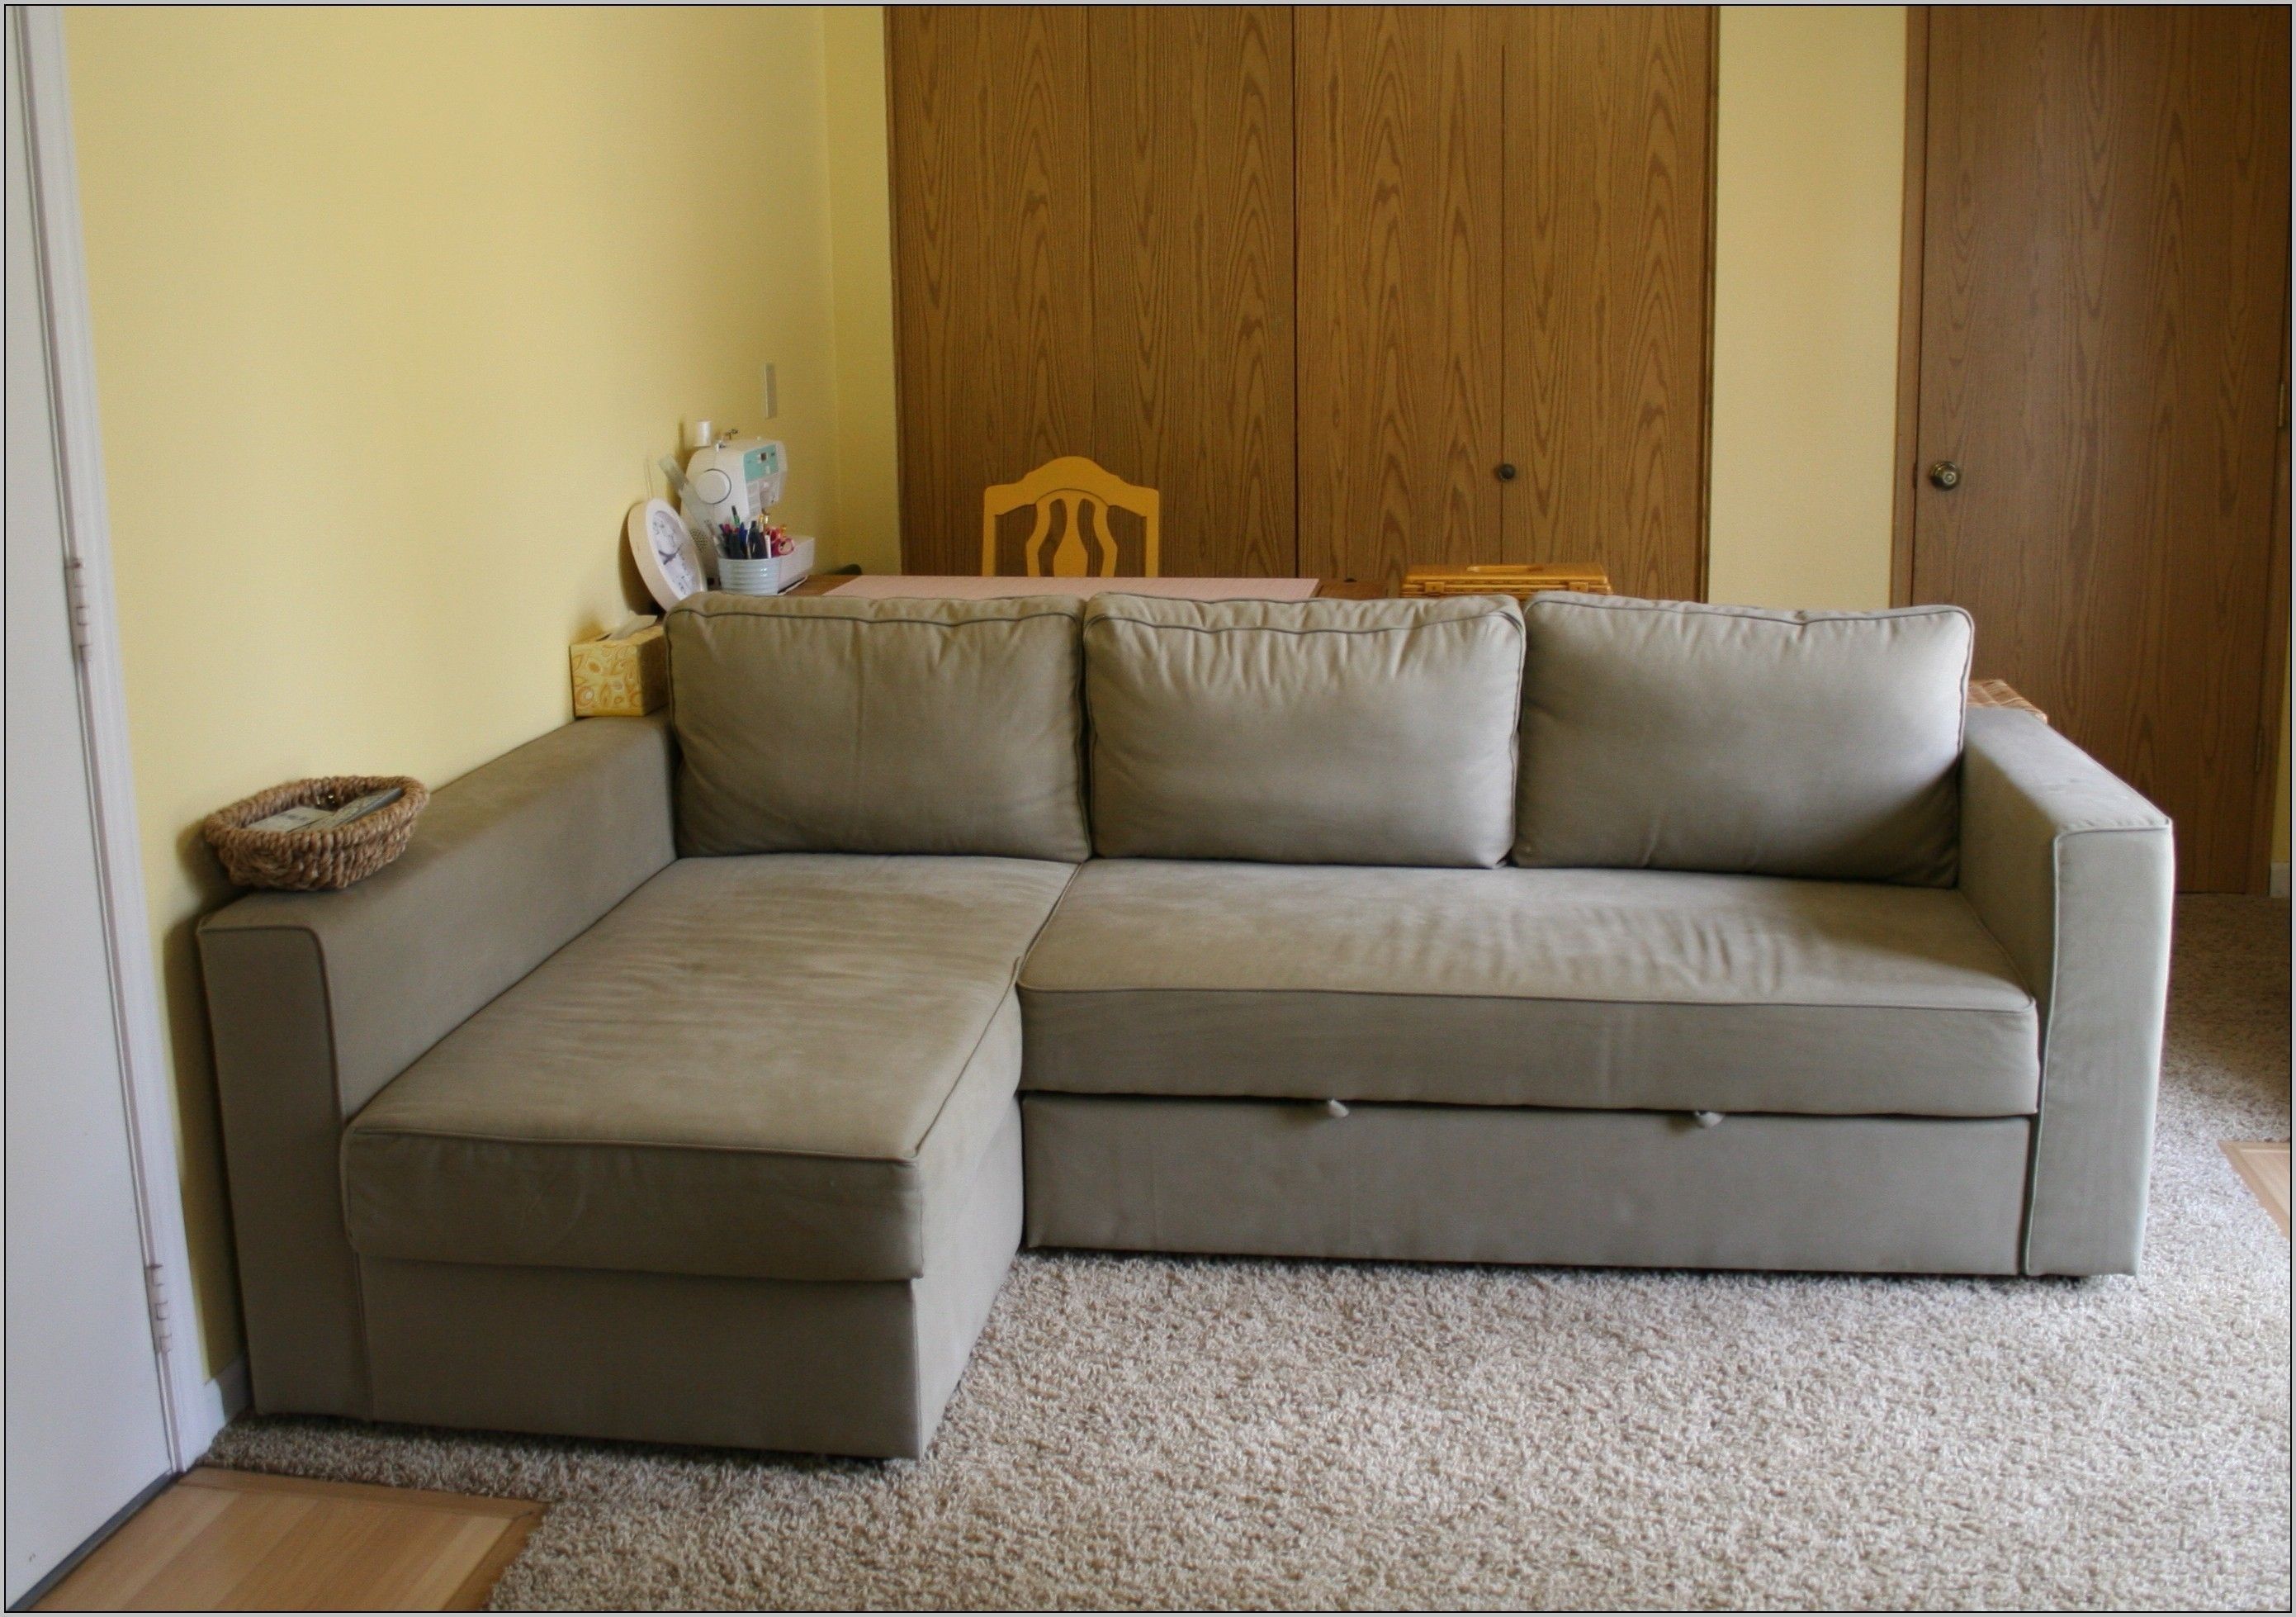 Sectional Sleeper Sofa Ikea Regarding Furniture With Recliner Ideas With Regard To Ikea Sectional Sofa Beds (View 10 of 10)